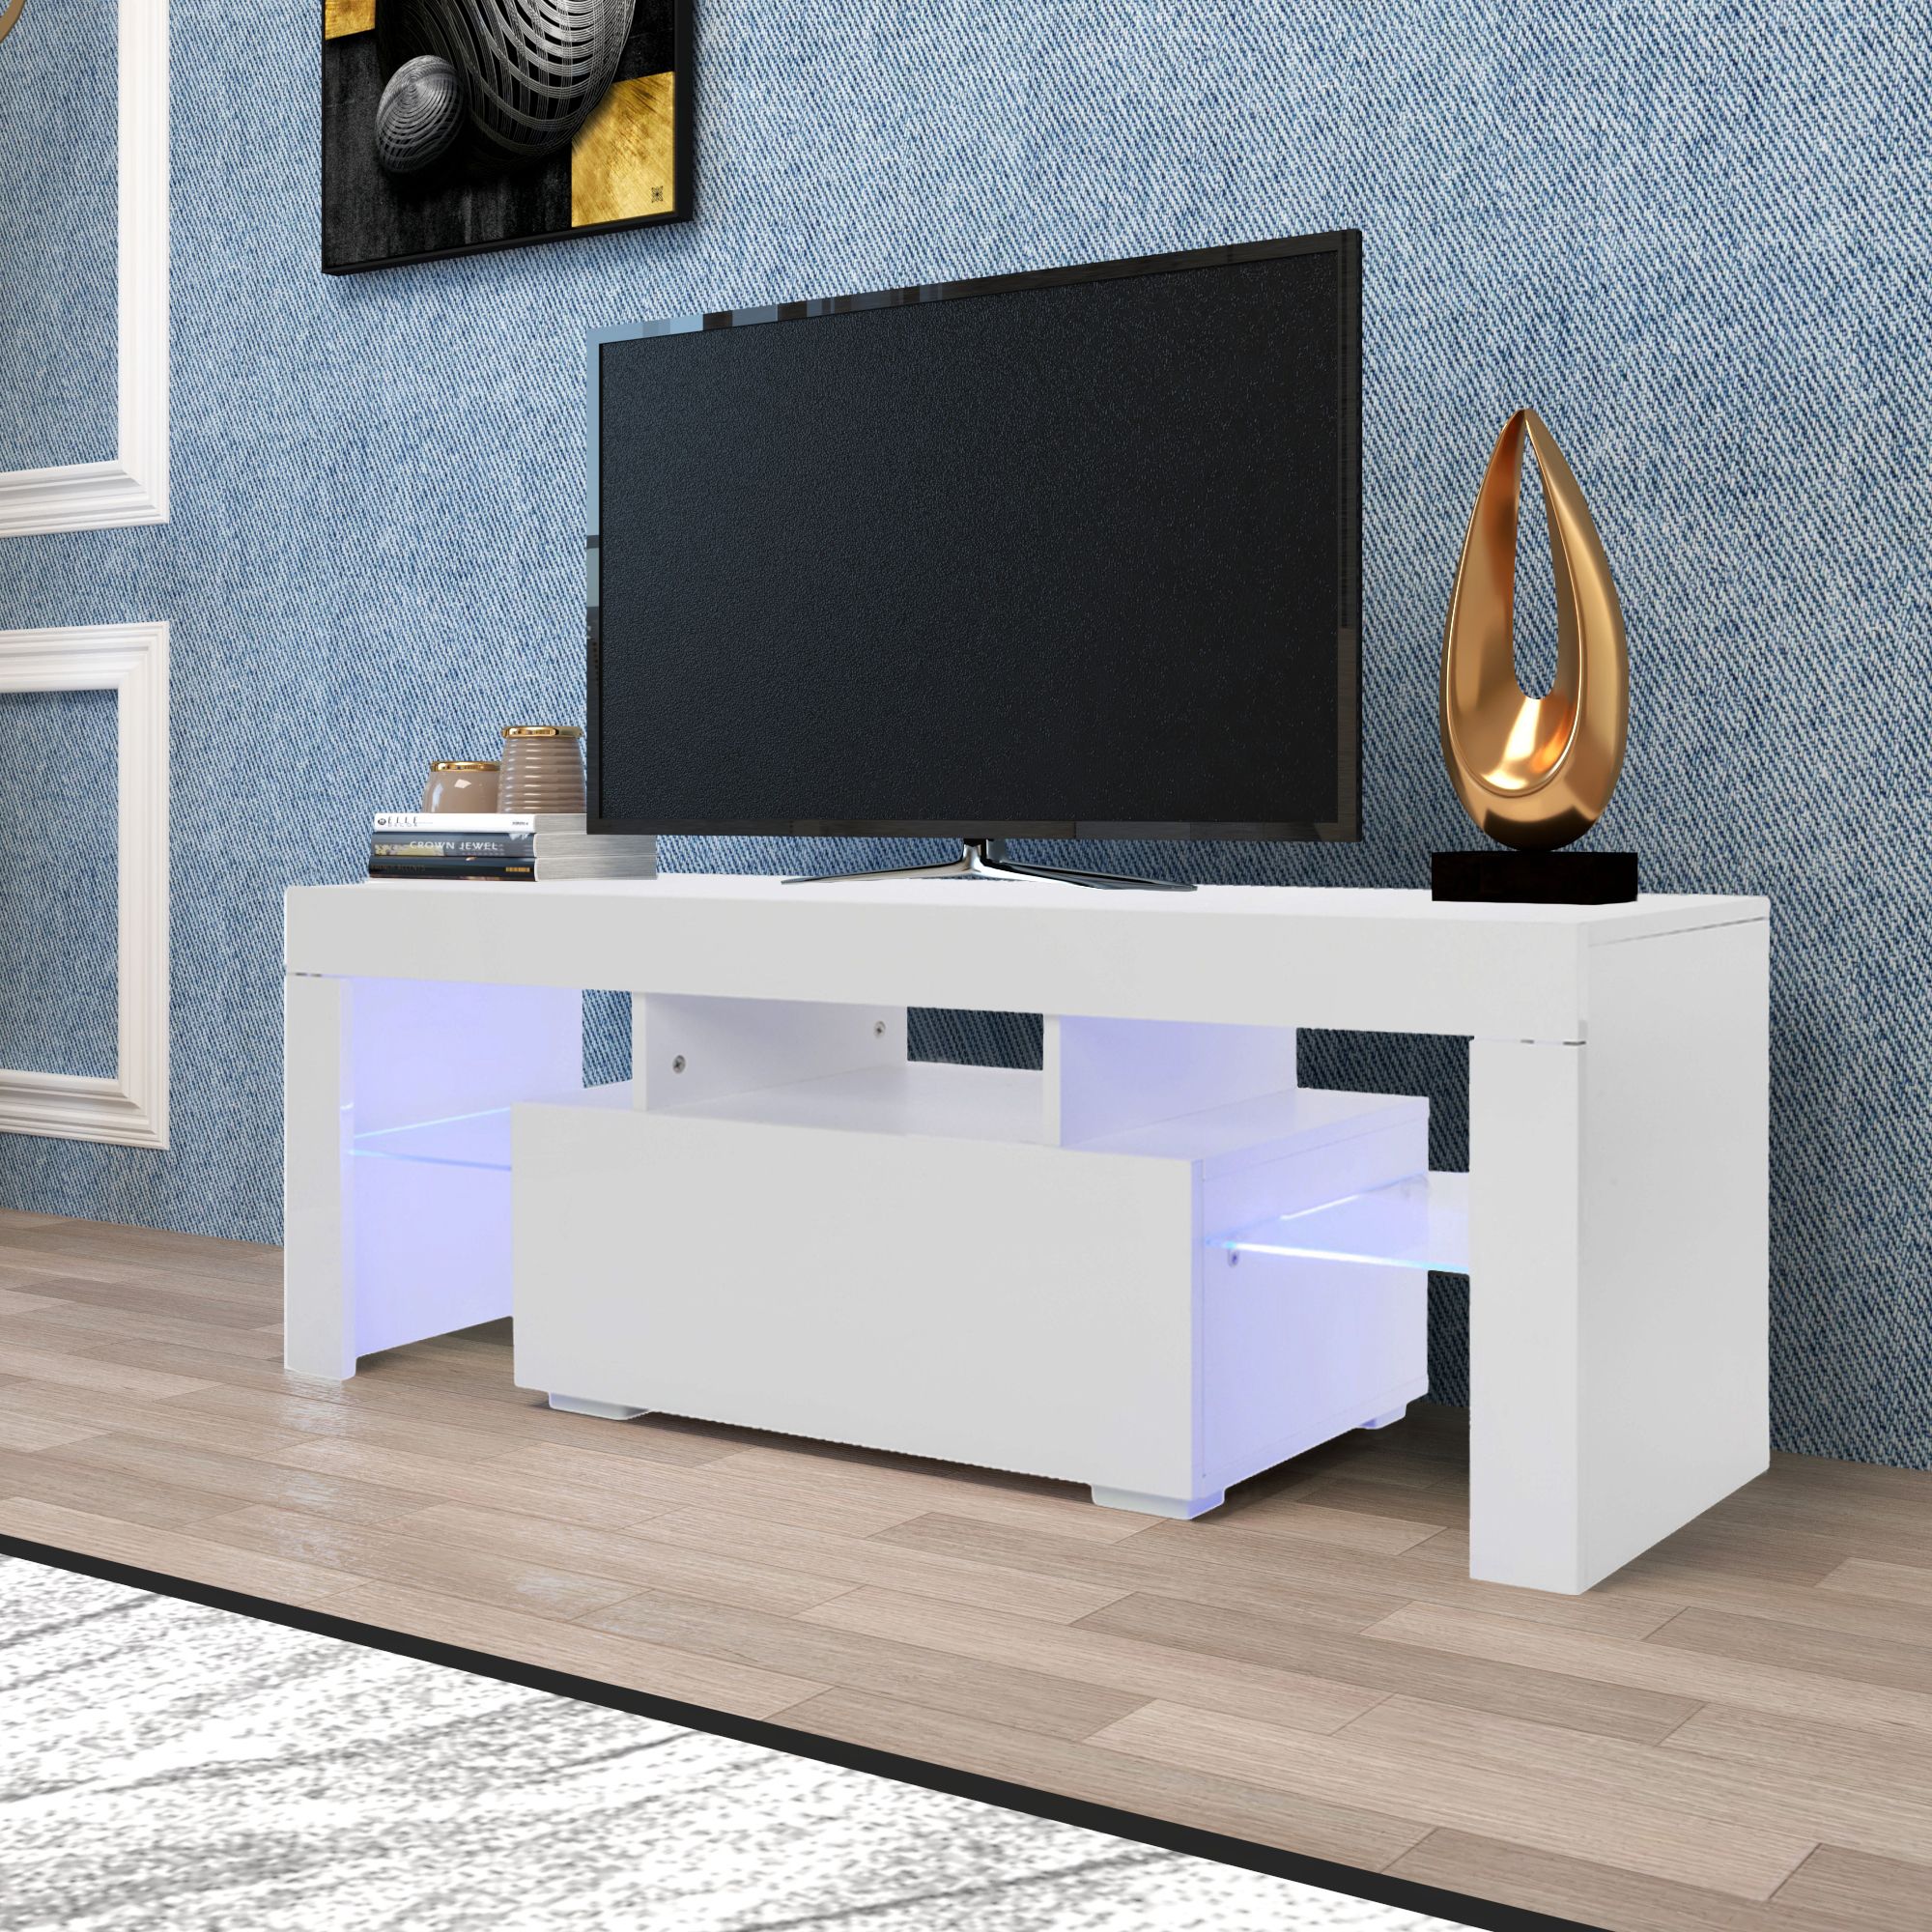 Entertainment Centers And Tv Stands, Yofe Tv Stand With With Zimtown Tv Stands With High Gloss Led Lights (View 3 of 15)